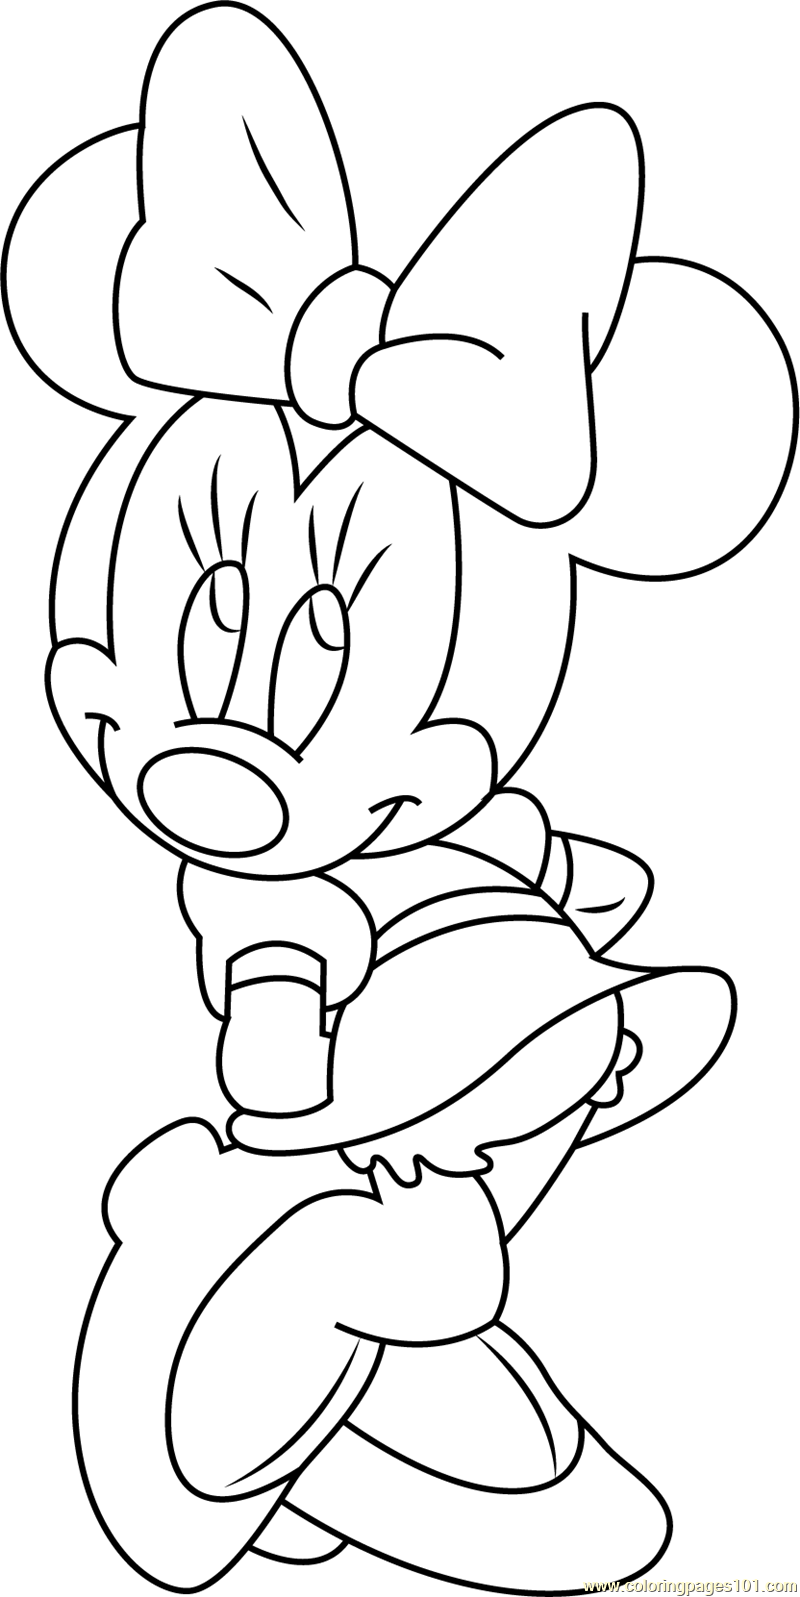 Minnie Mouse Shy Coloring Page - Free Minnie Mouse ...